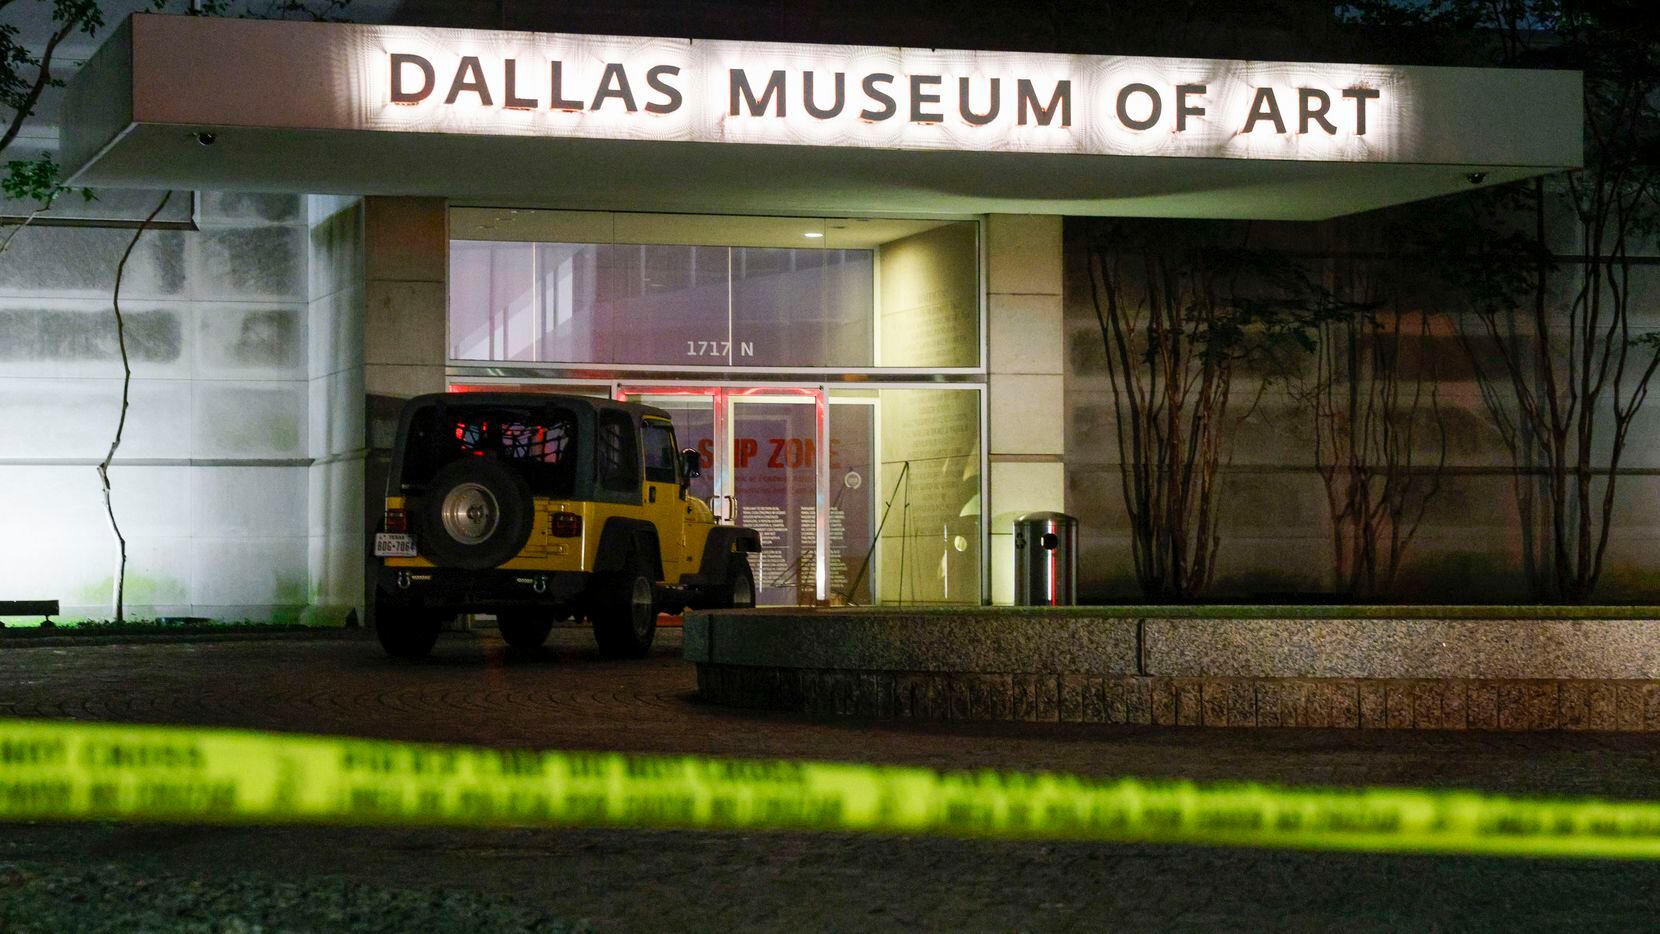 Police tape blocks an entrance to the Dallas Museum of Art entrance at Flora and Harwood...